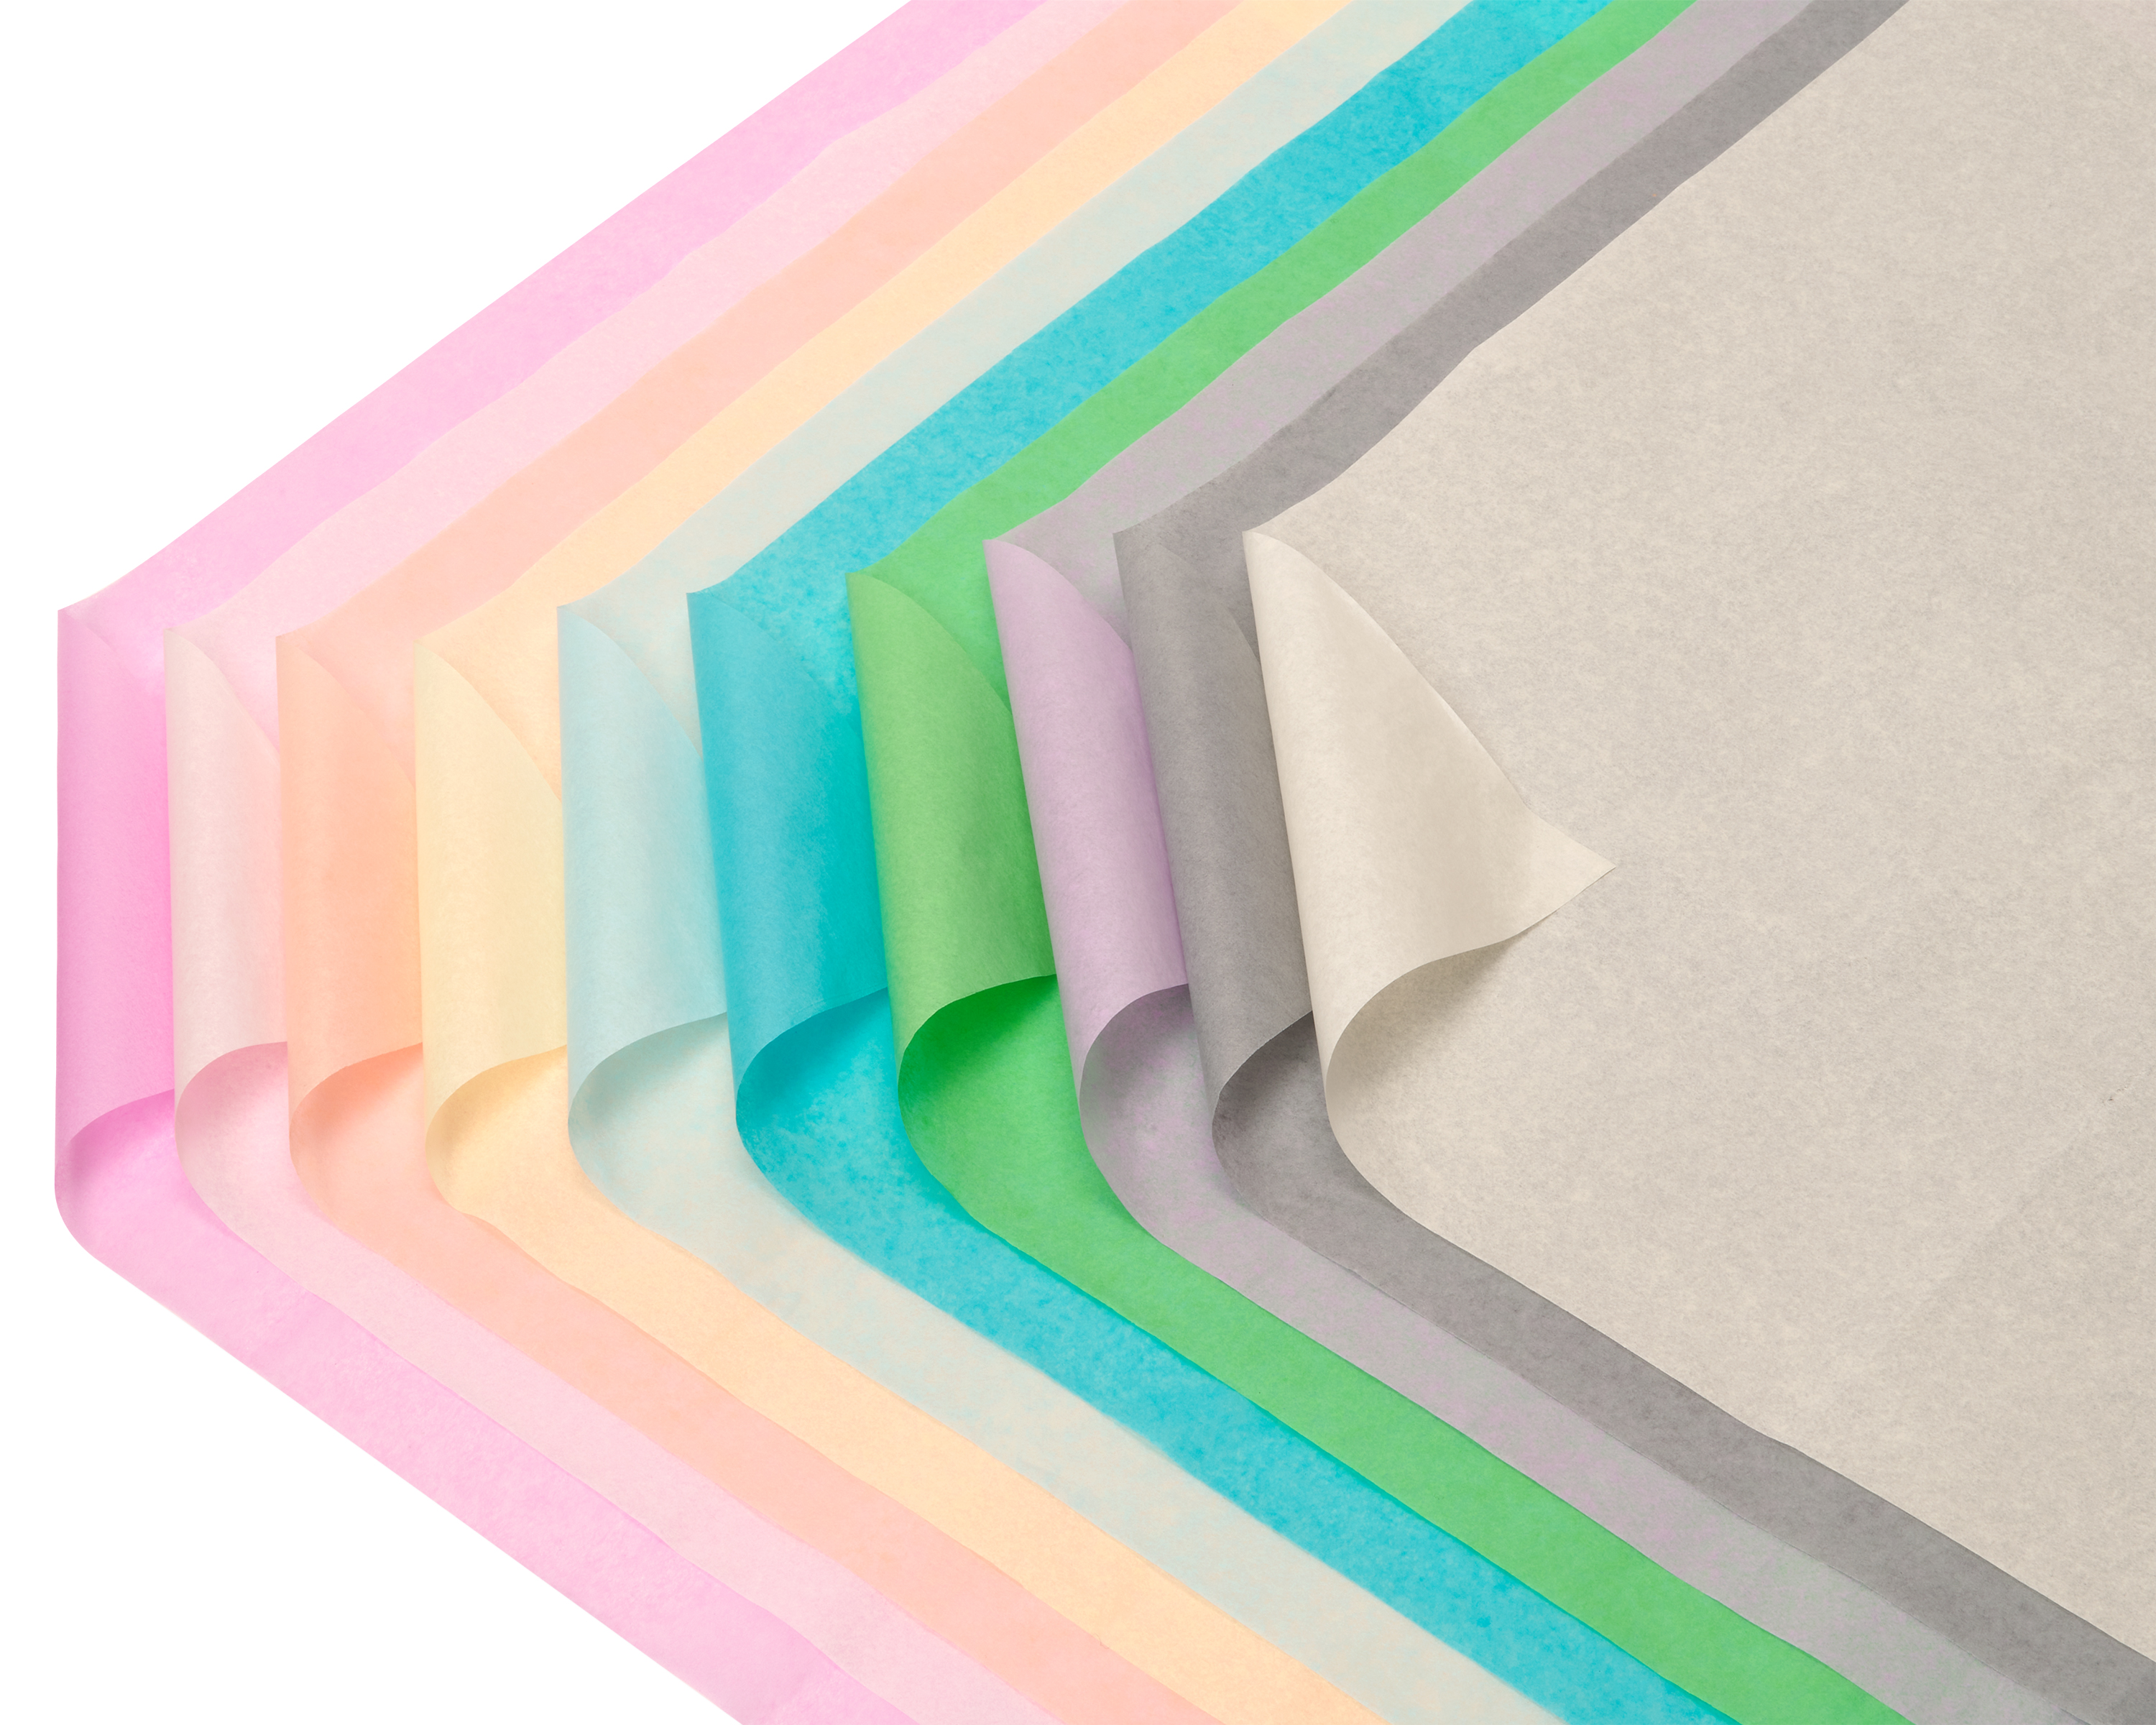 American Greetings 200 Sheets 20 in. x 20 in. Bulk Pastel Tissue Paper for Birthdays, Holidays, and All Occasions